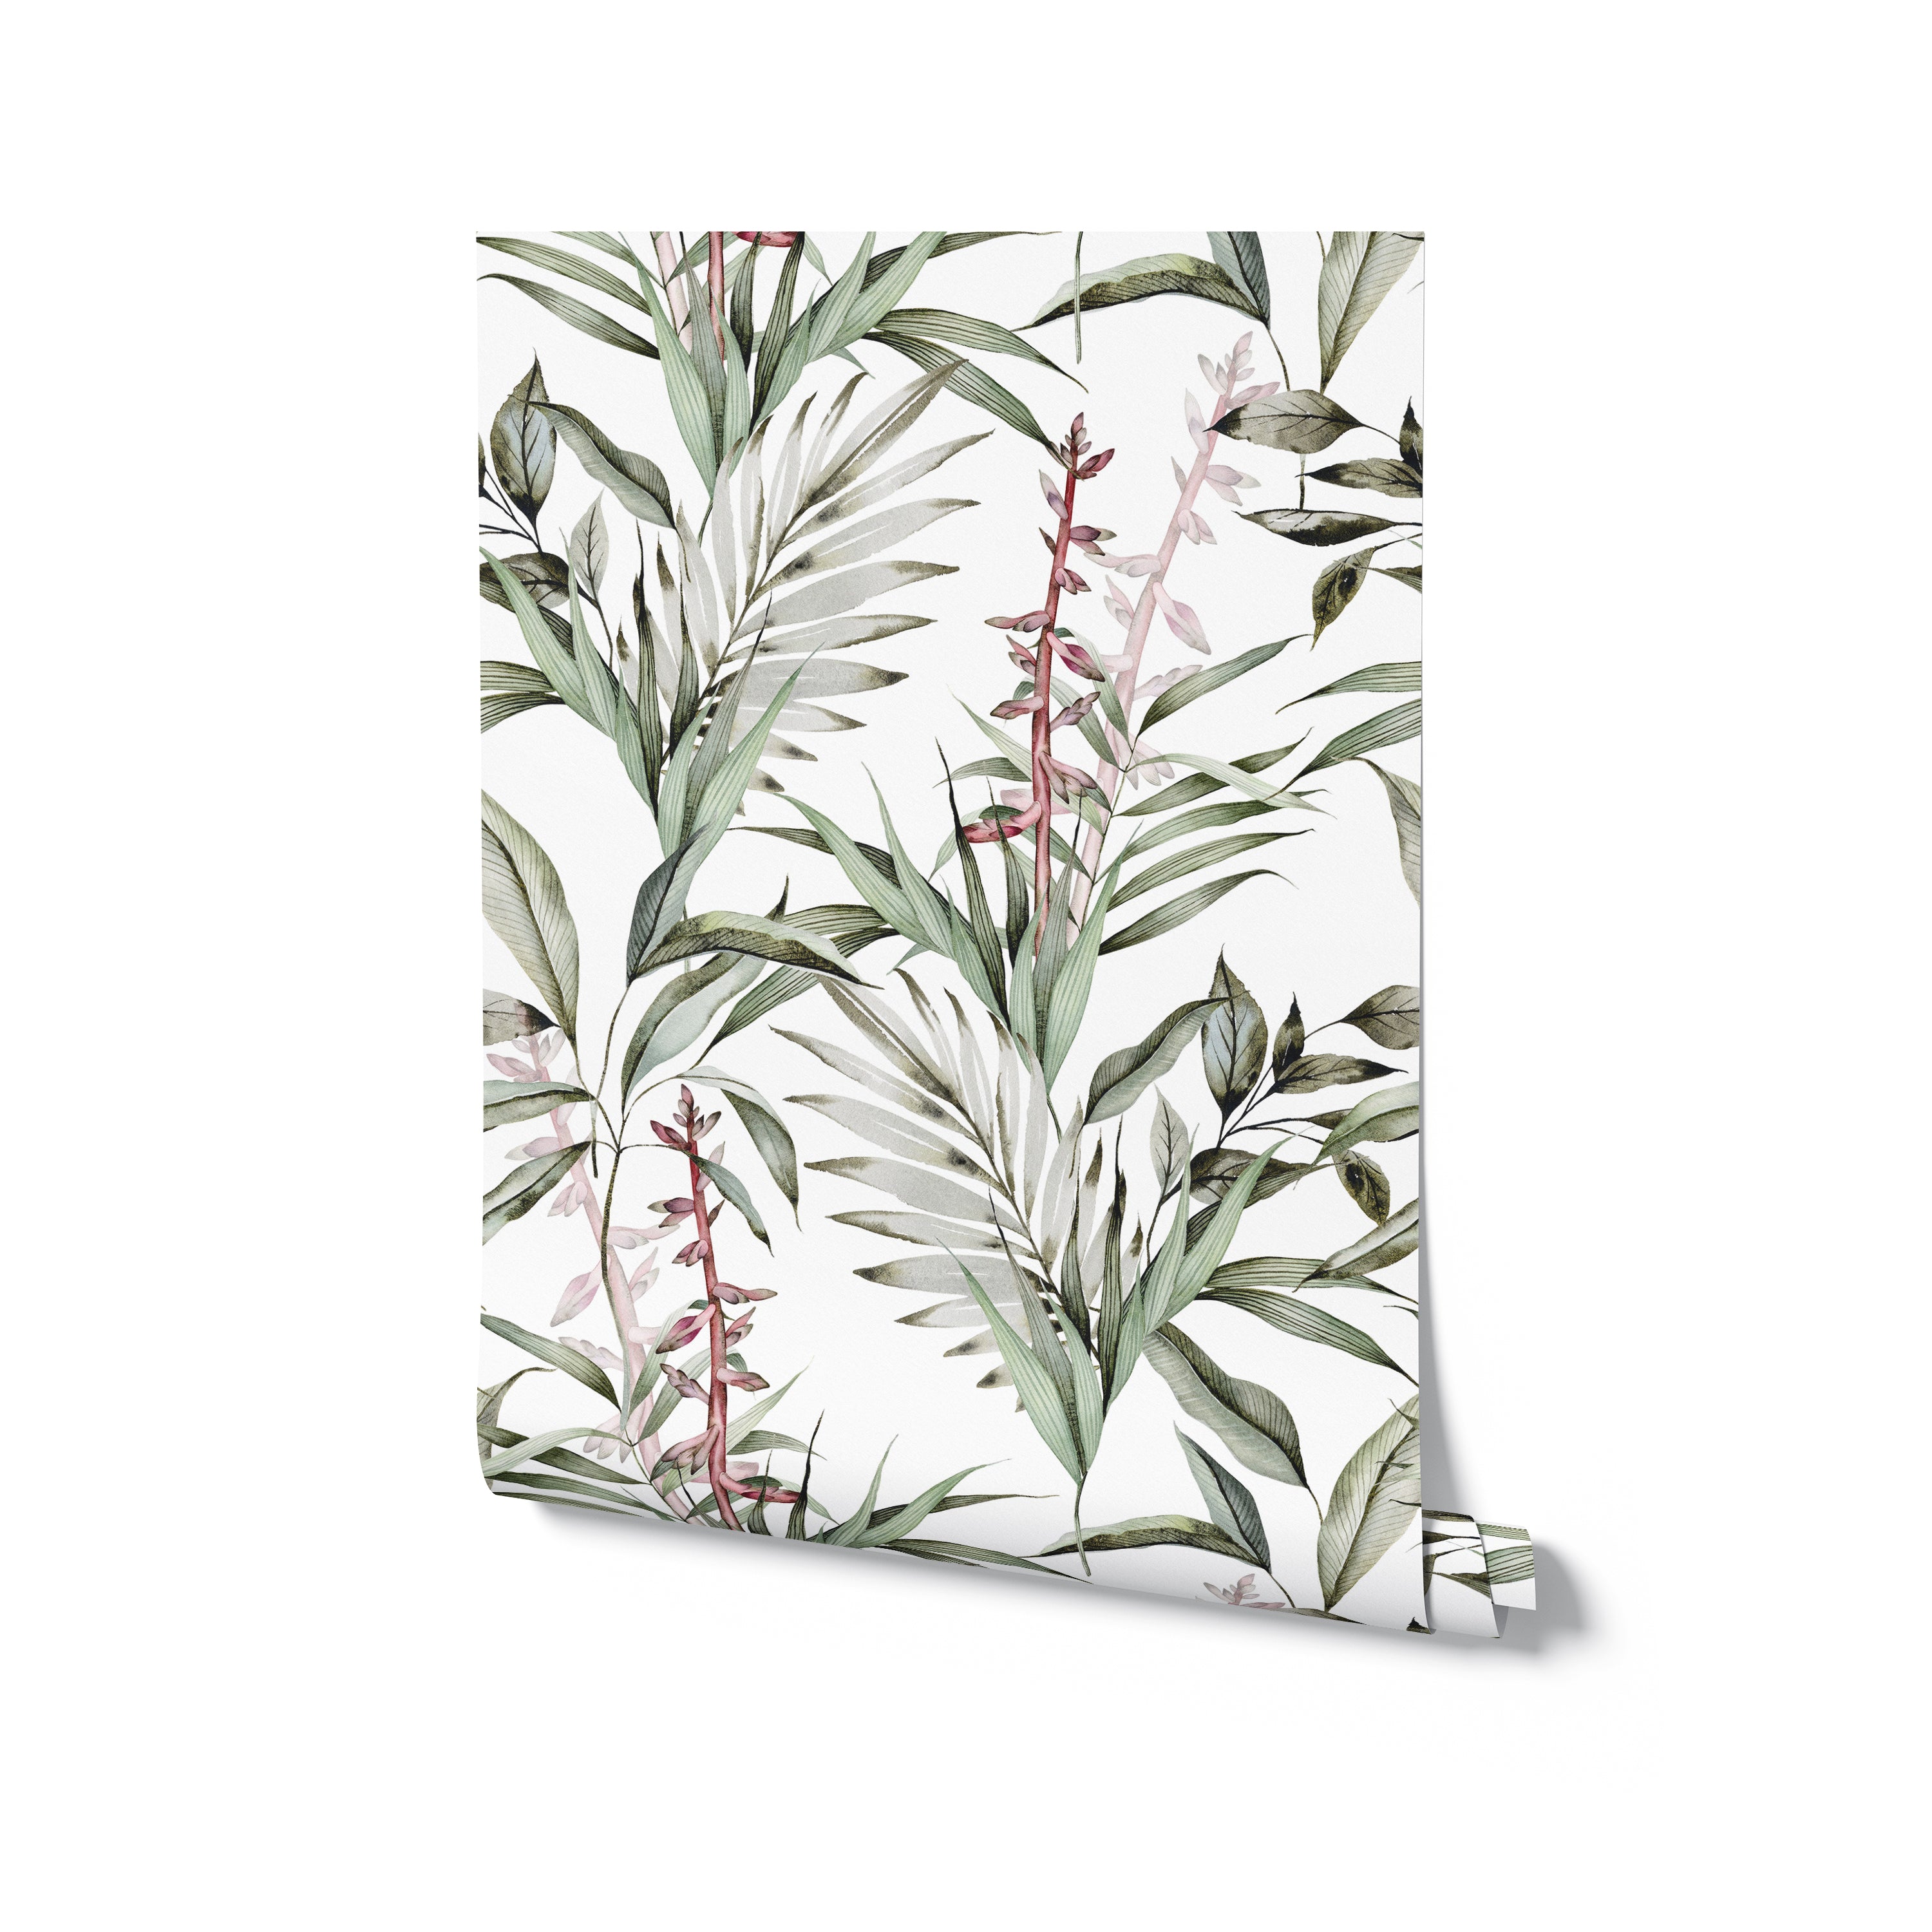 A roll of tropical branches wallpaper unrolled to display the full pattern. The design features an intricate pattern of green leaves and pinkish-red flowers on a light background. The detailed and natural look makes it ideal for adding a touch of nature and elegance to any room.